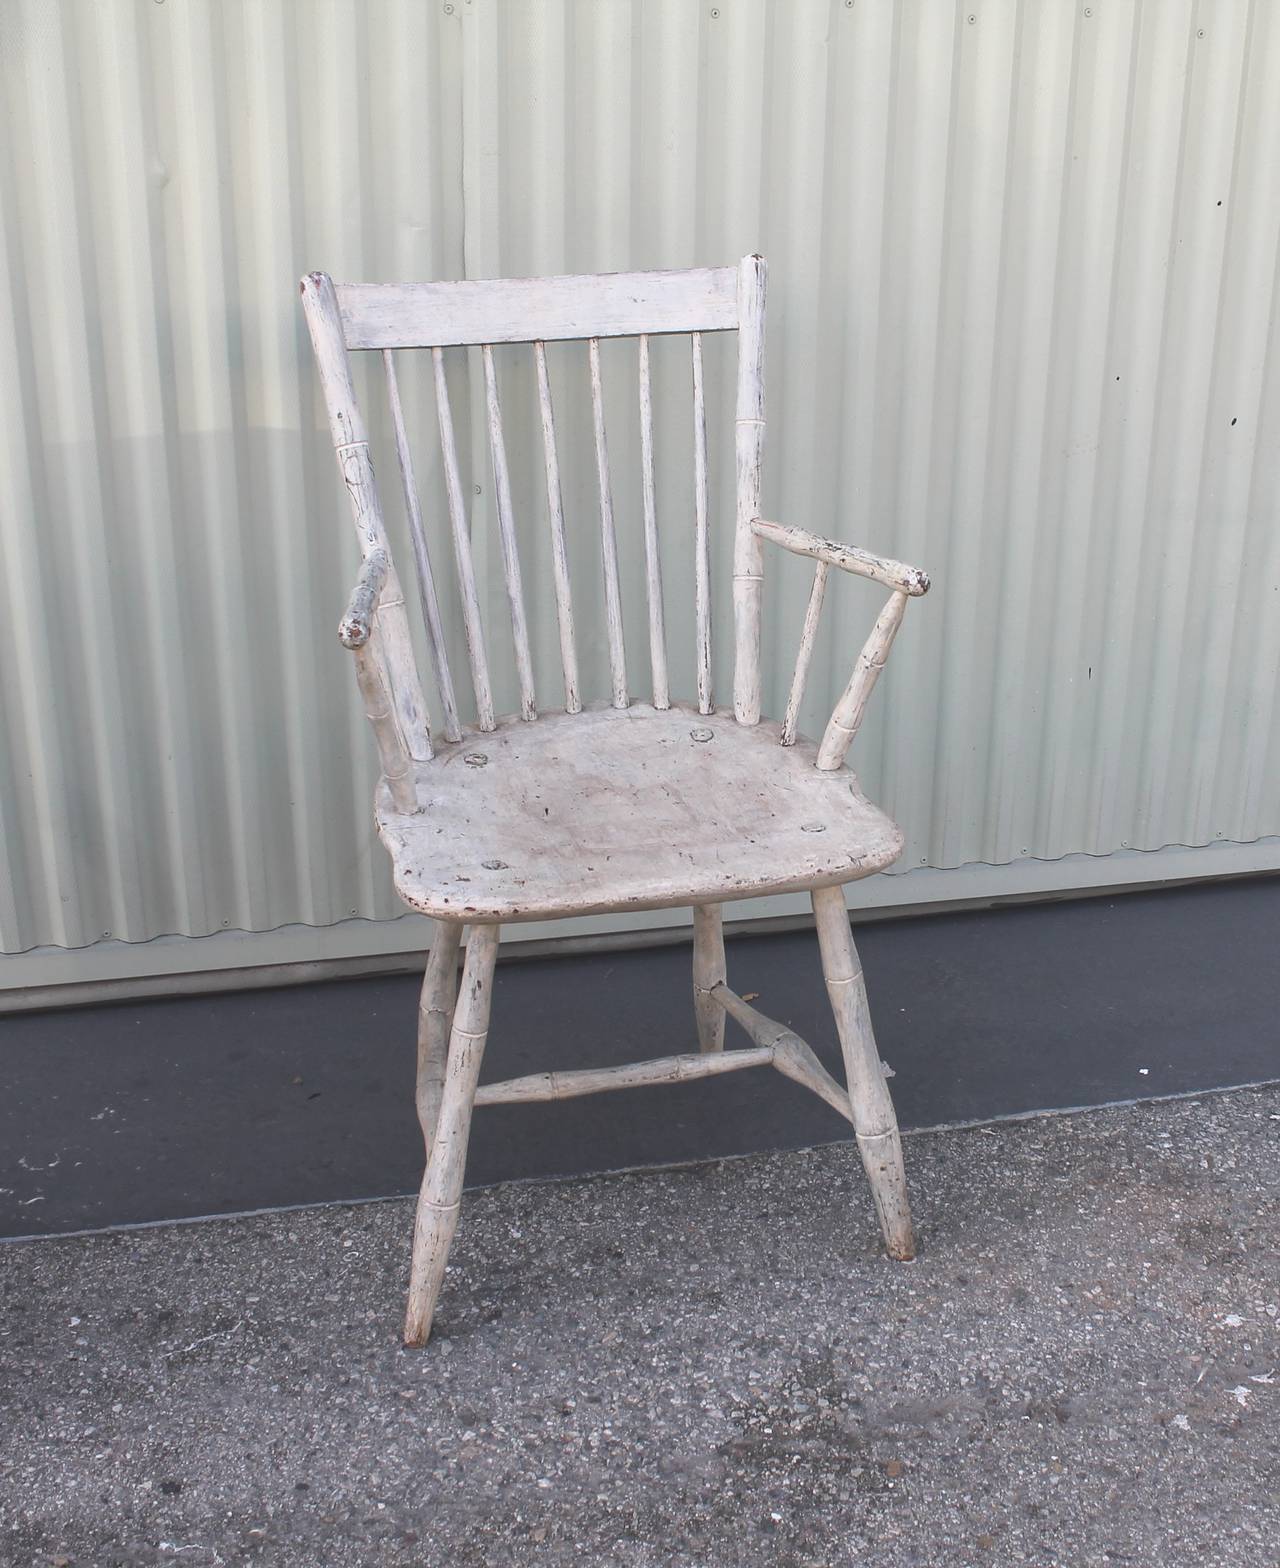 This fine New England original white painted country Windsor chair has such great form and a wonderful undisturbed surface. Found in Pennsylvania and has such a great simple early form. Super untouched patina.